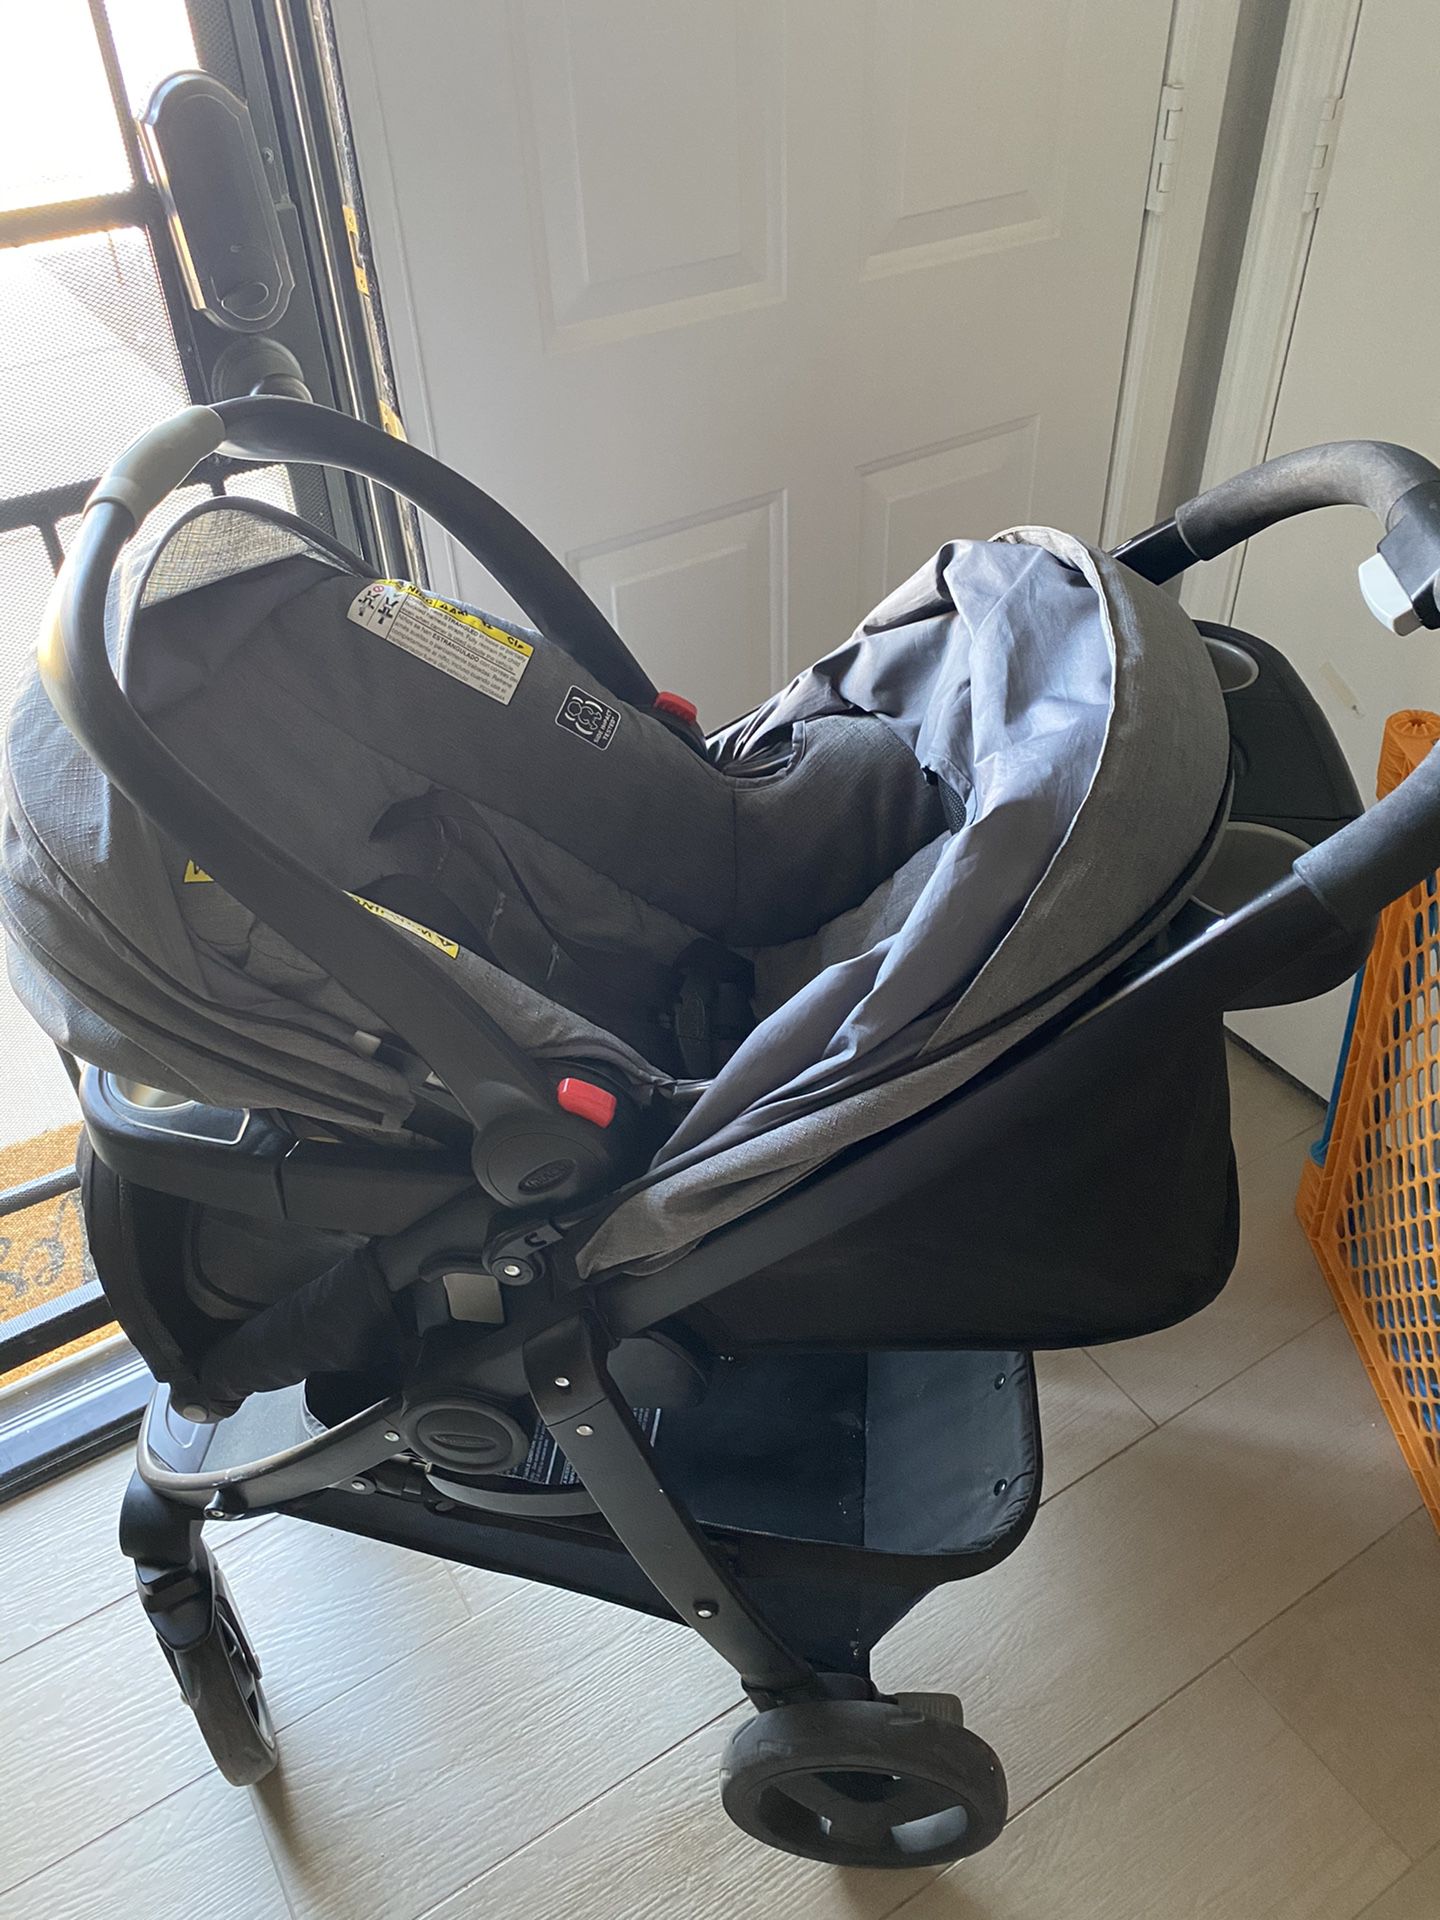 Graco Click Connect car seat and stroller